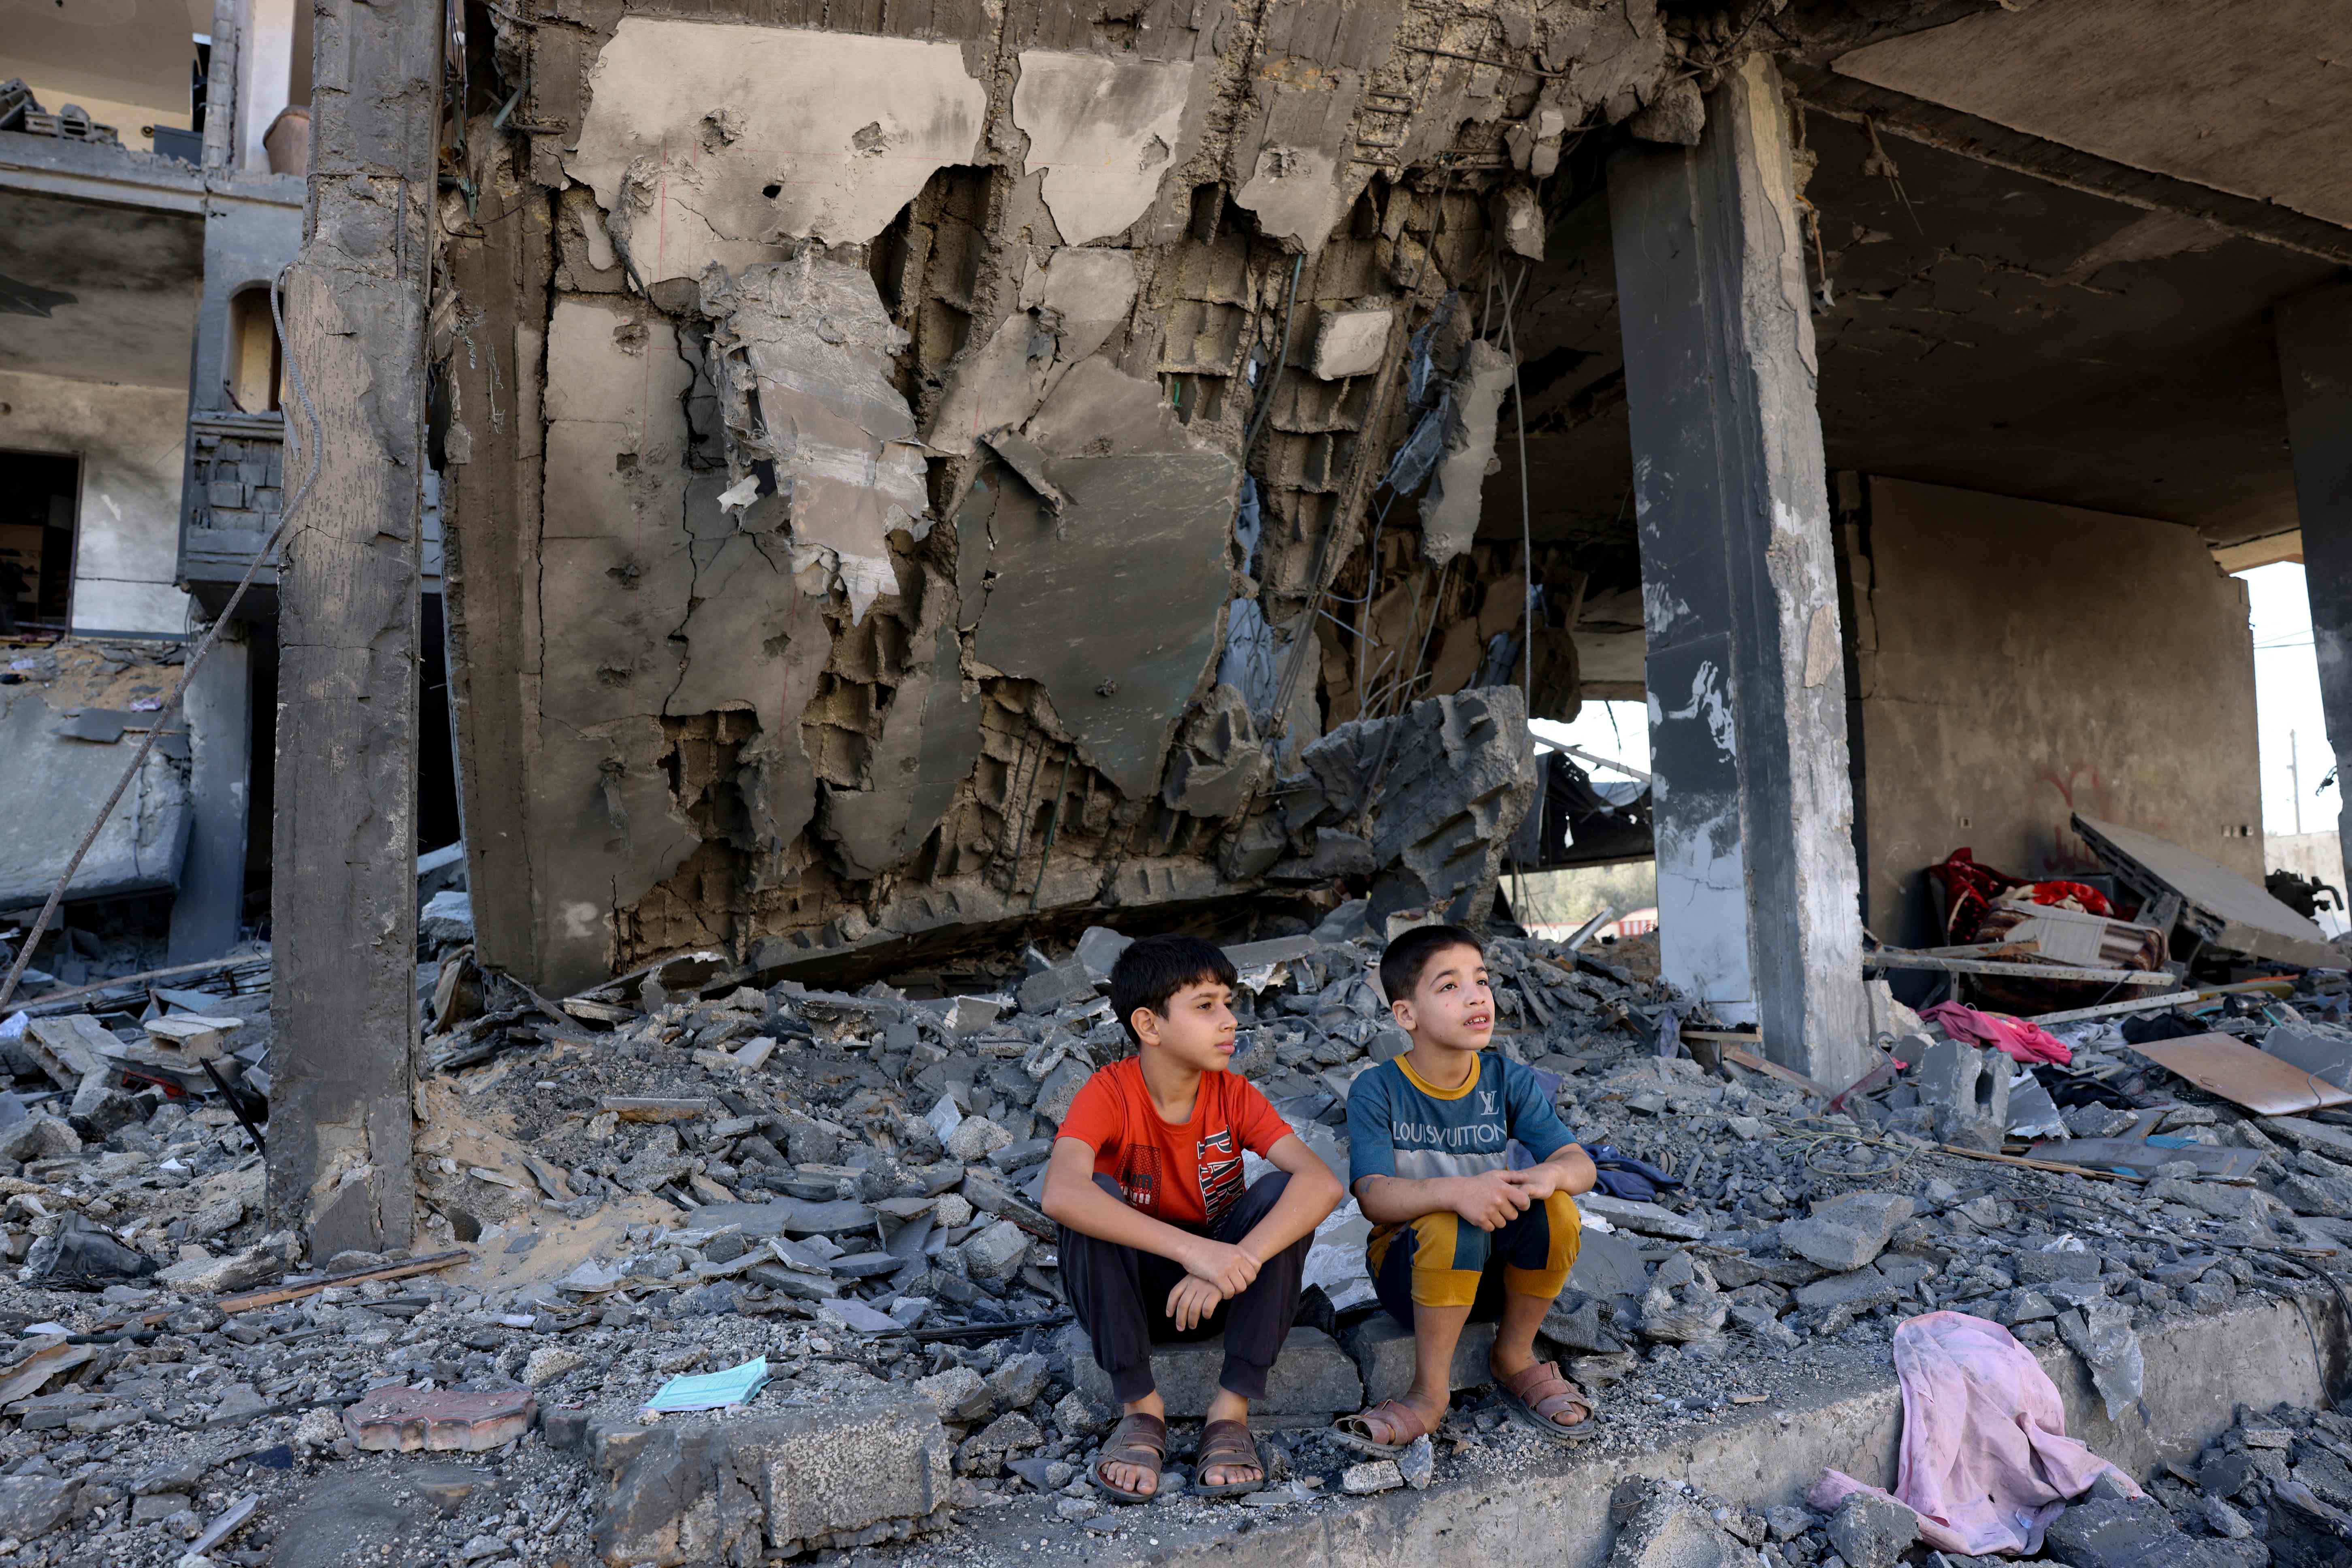 A million children in Gaza are now suffering with trauma, an aid agency has said